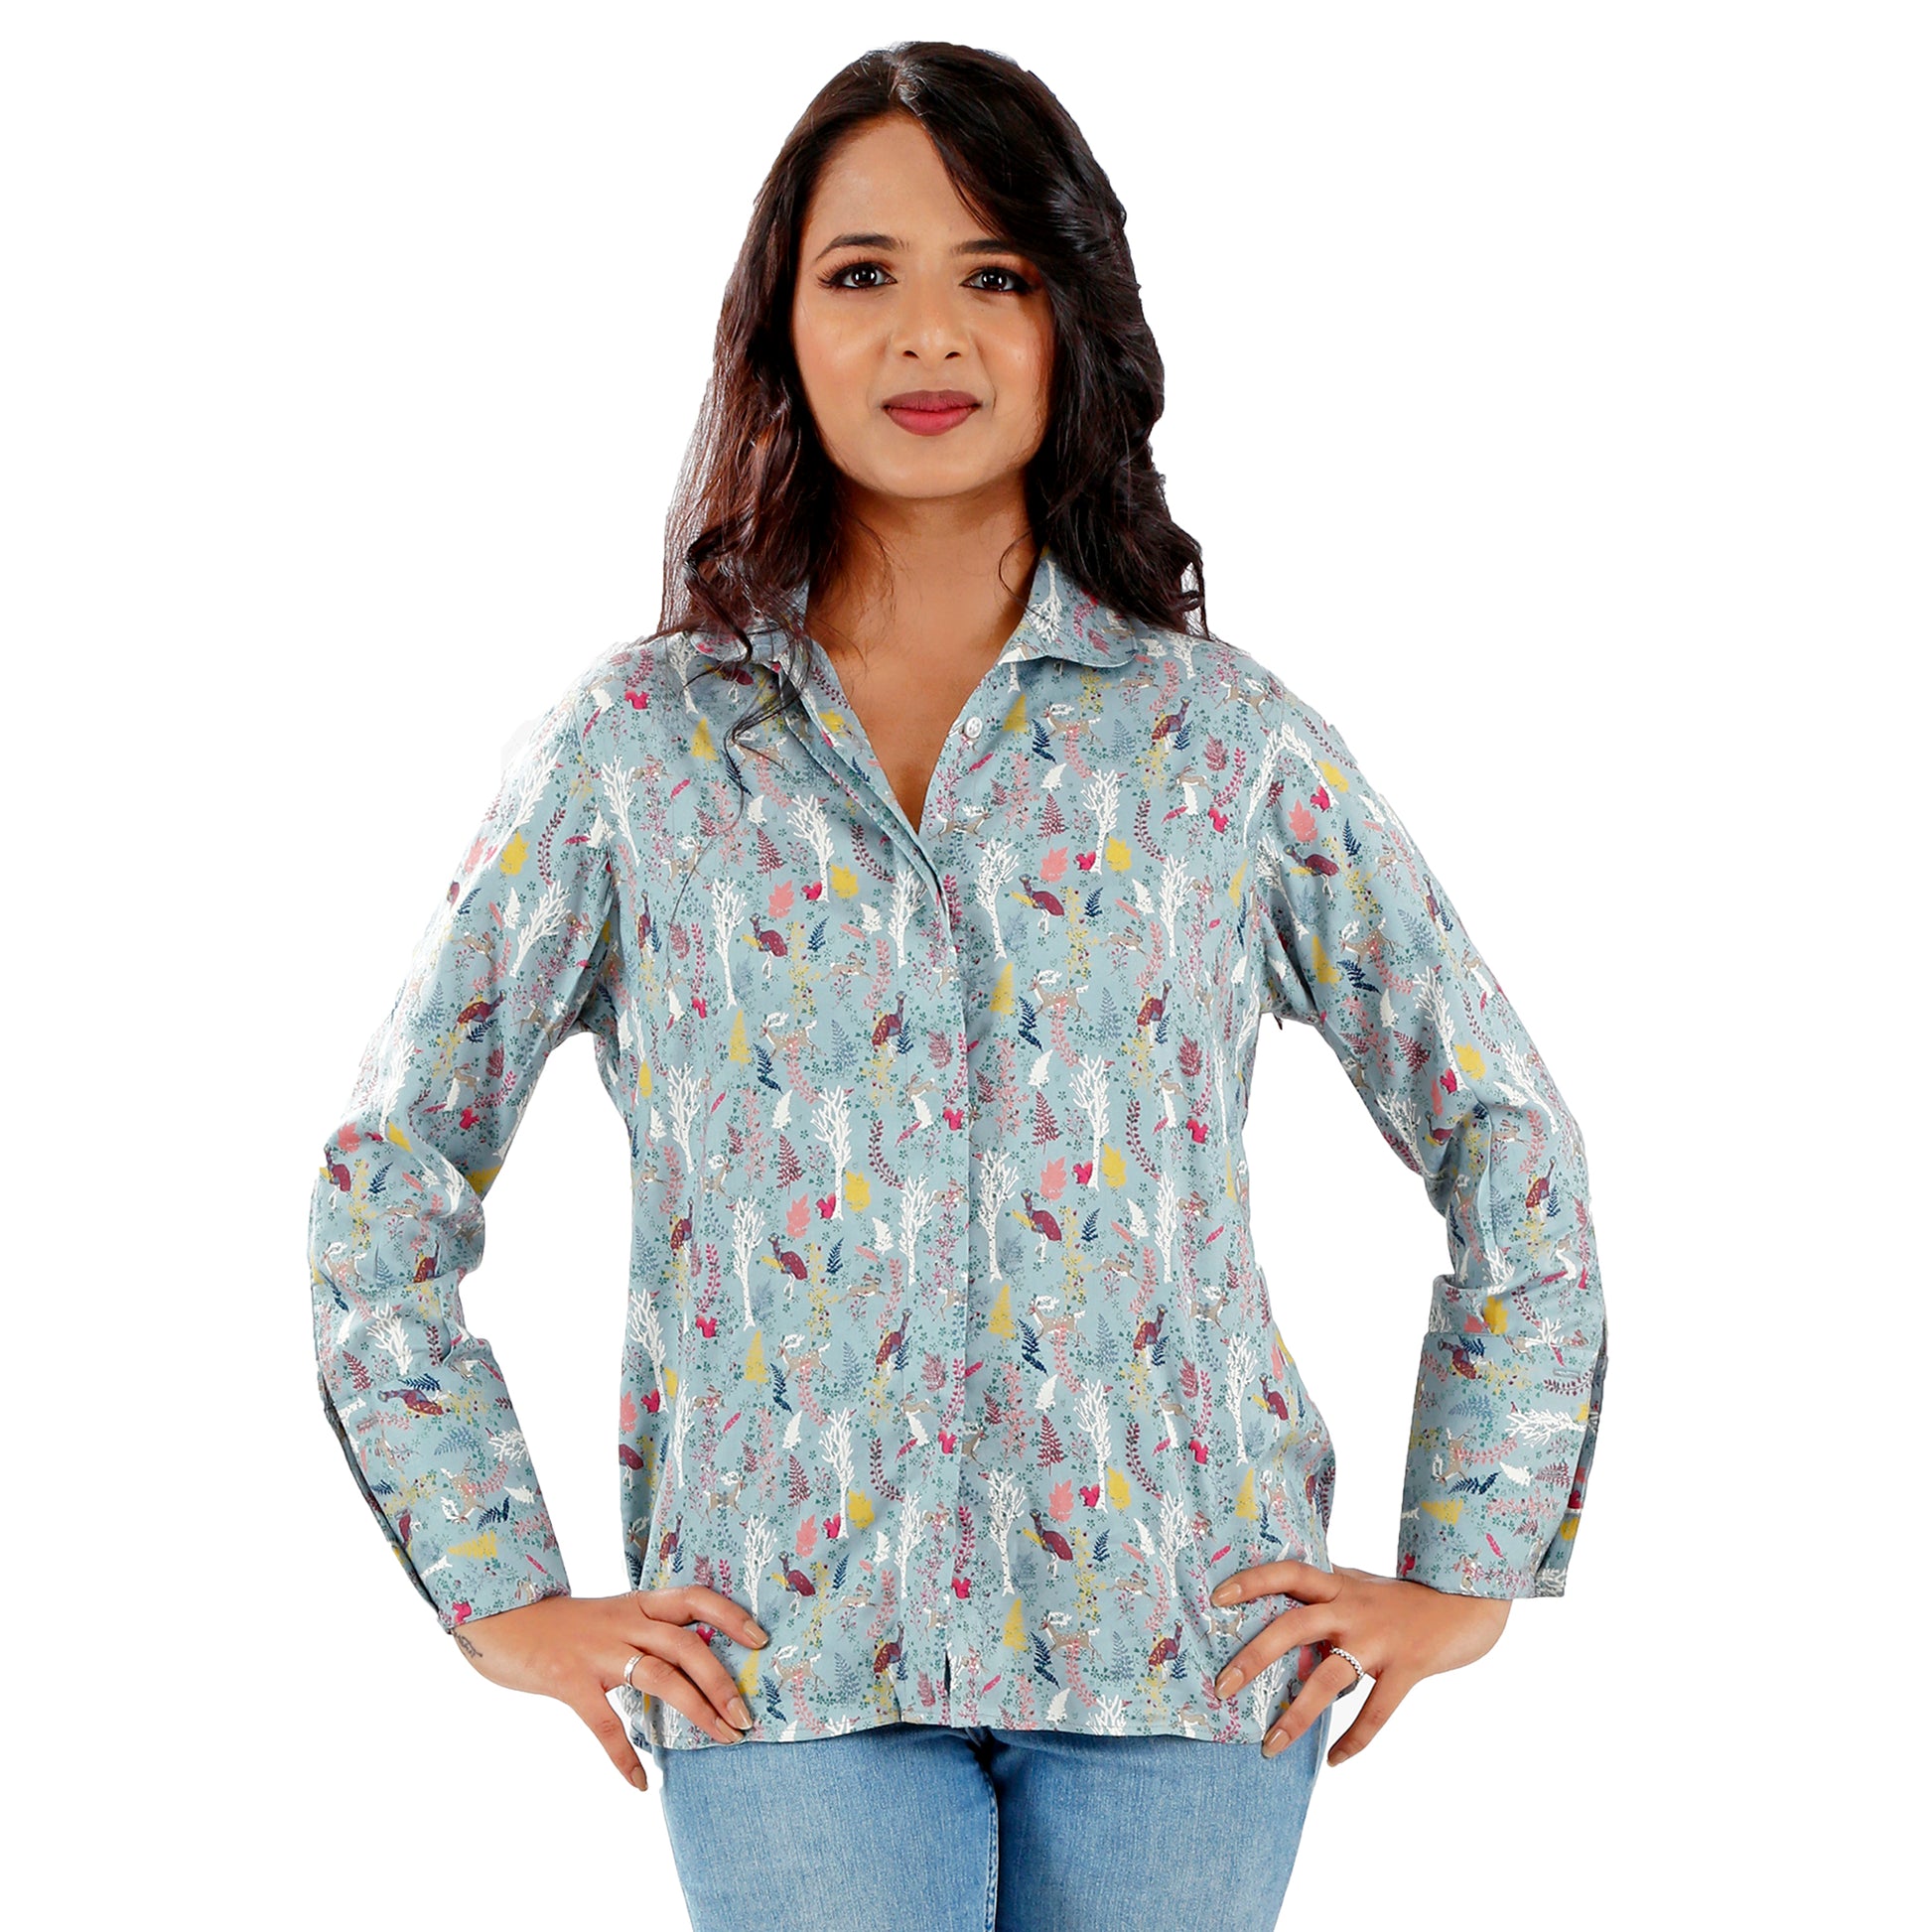 peacock print casual top for women in teal blue